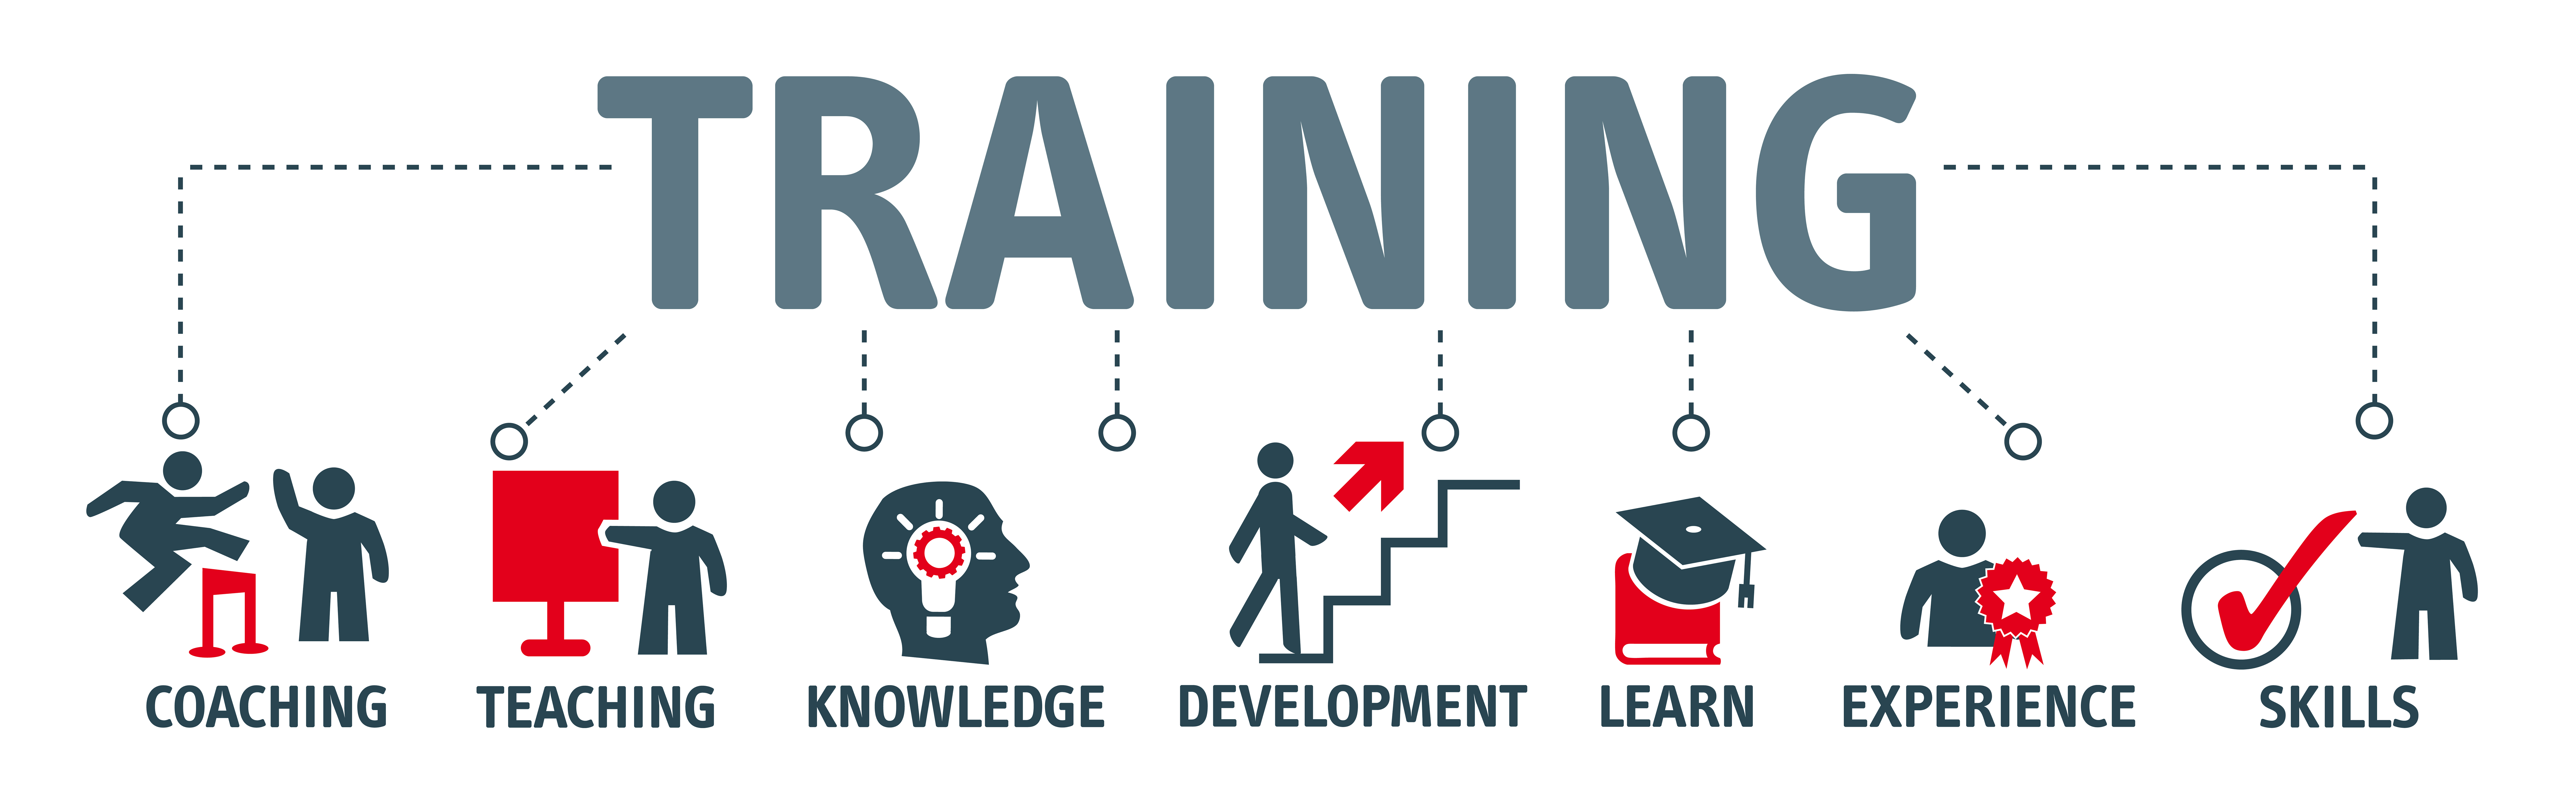 career education training and qualifications